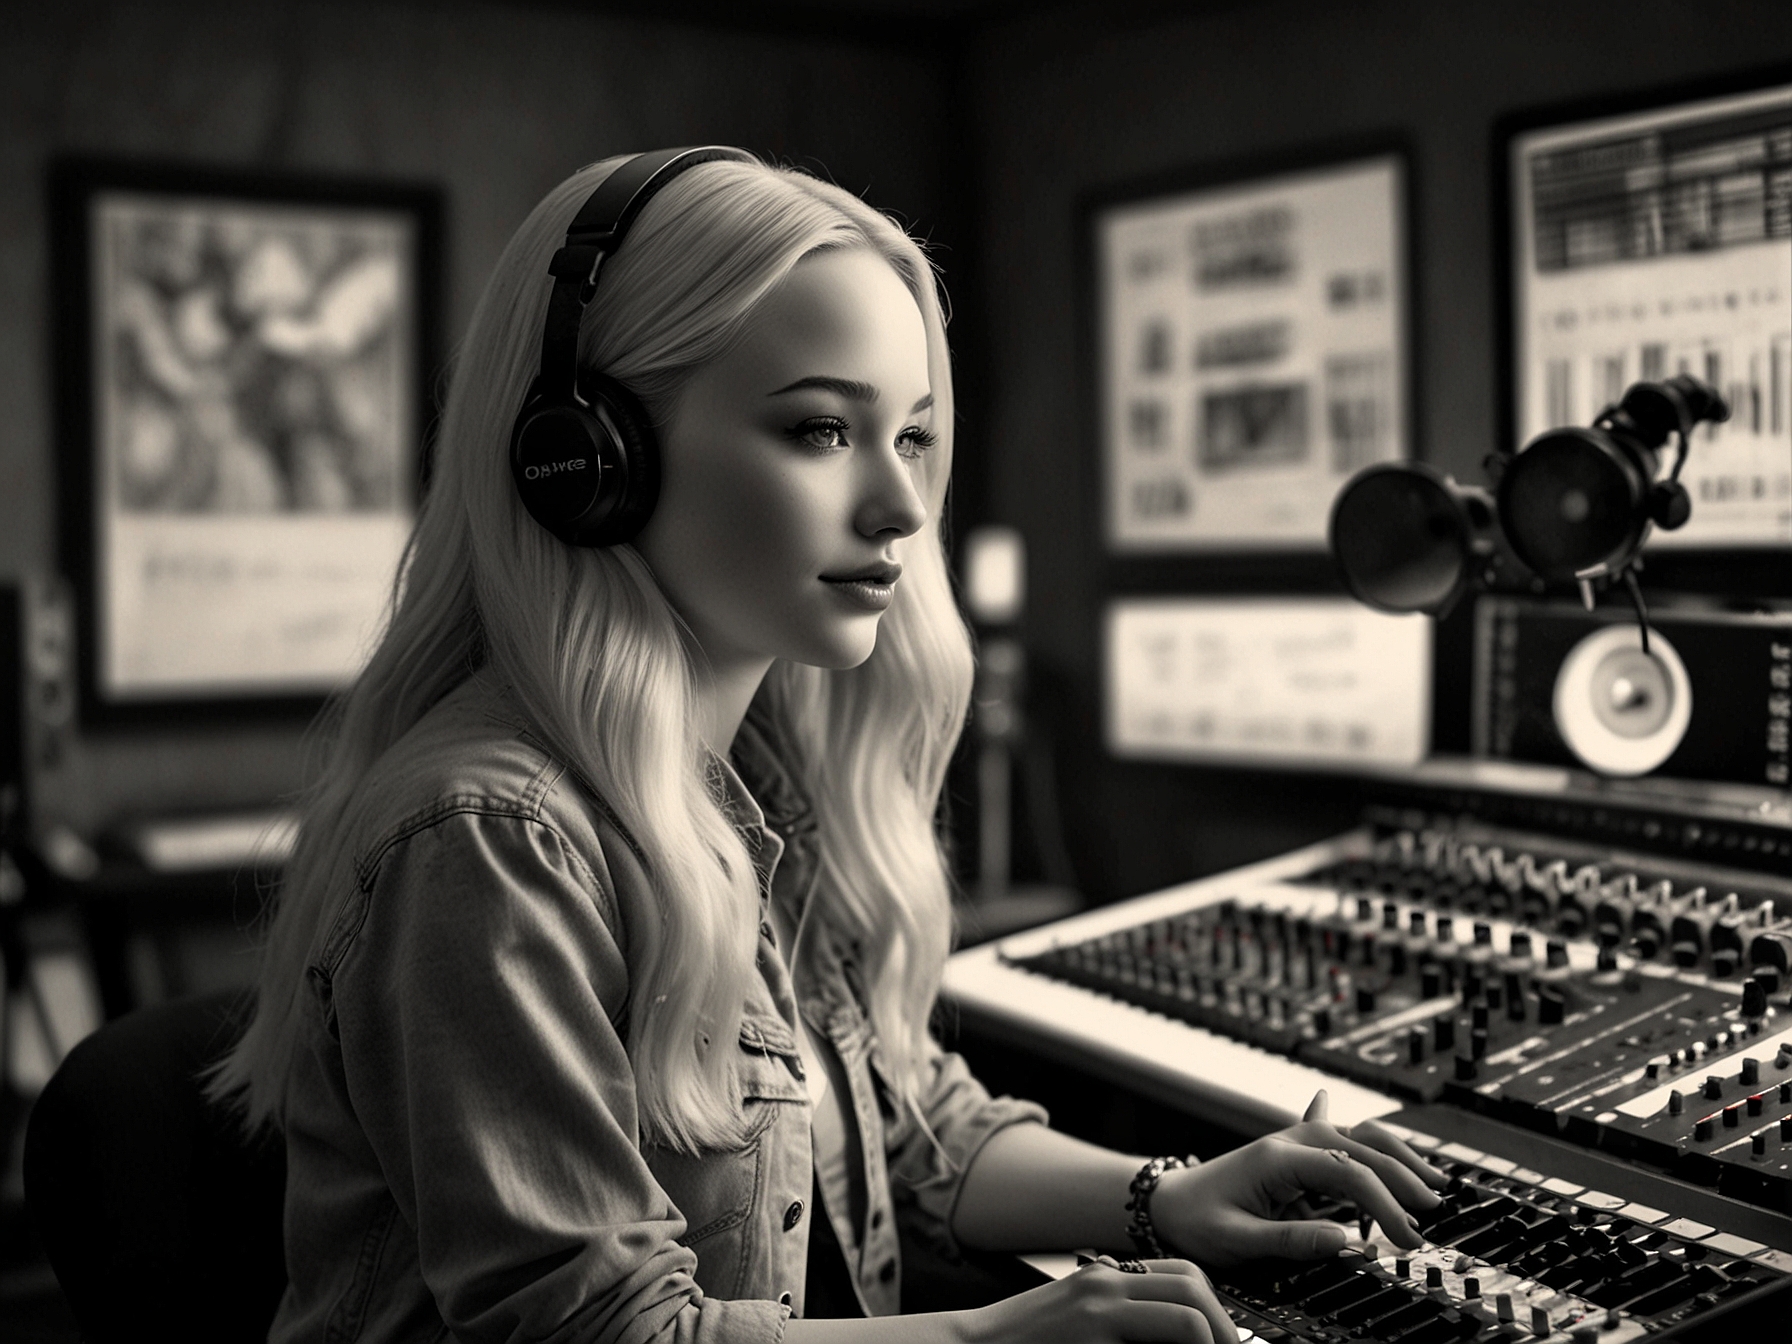 Dove Cameron in a recording studio, actively involved in the production process. She appears focused and empowered, highlighting her hands-on approach and creative freedom in making music.